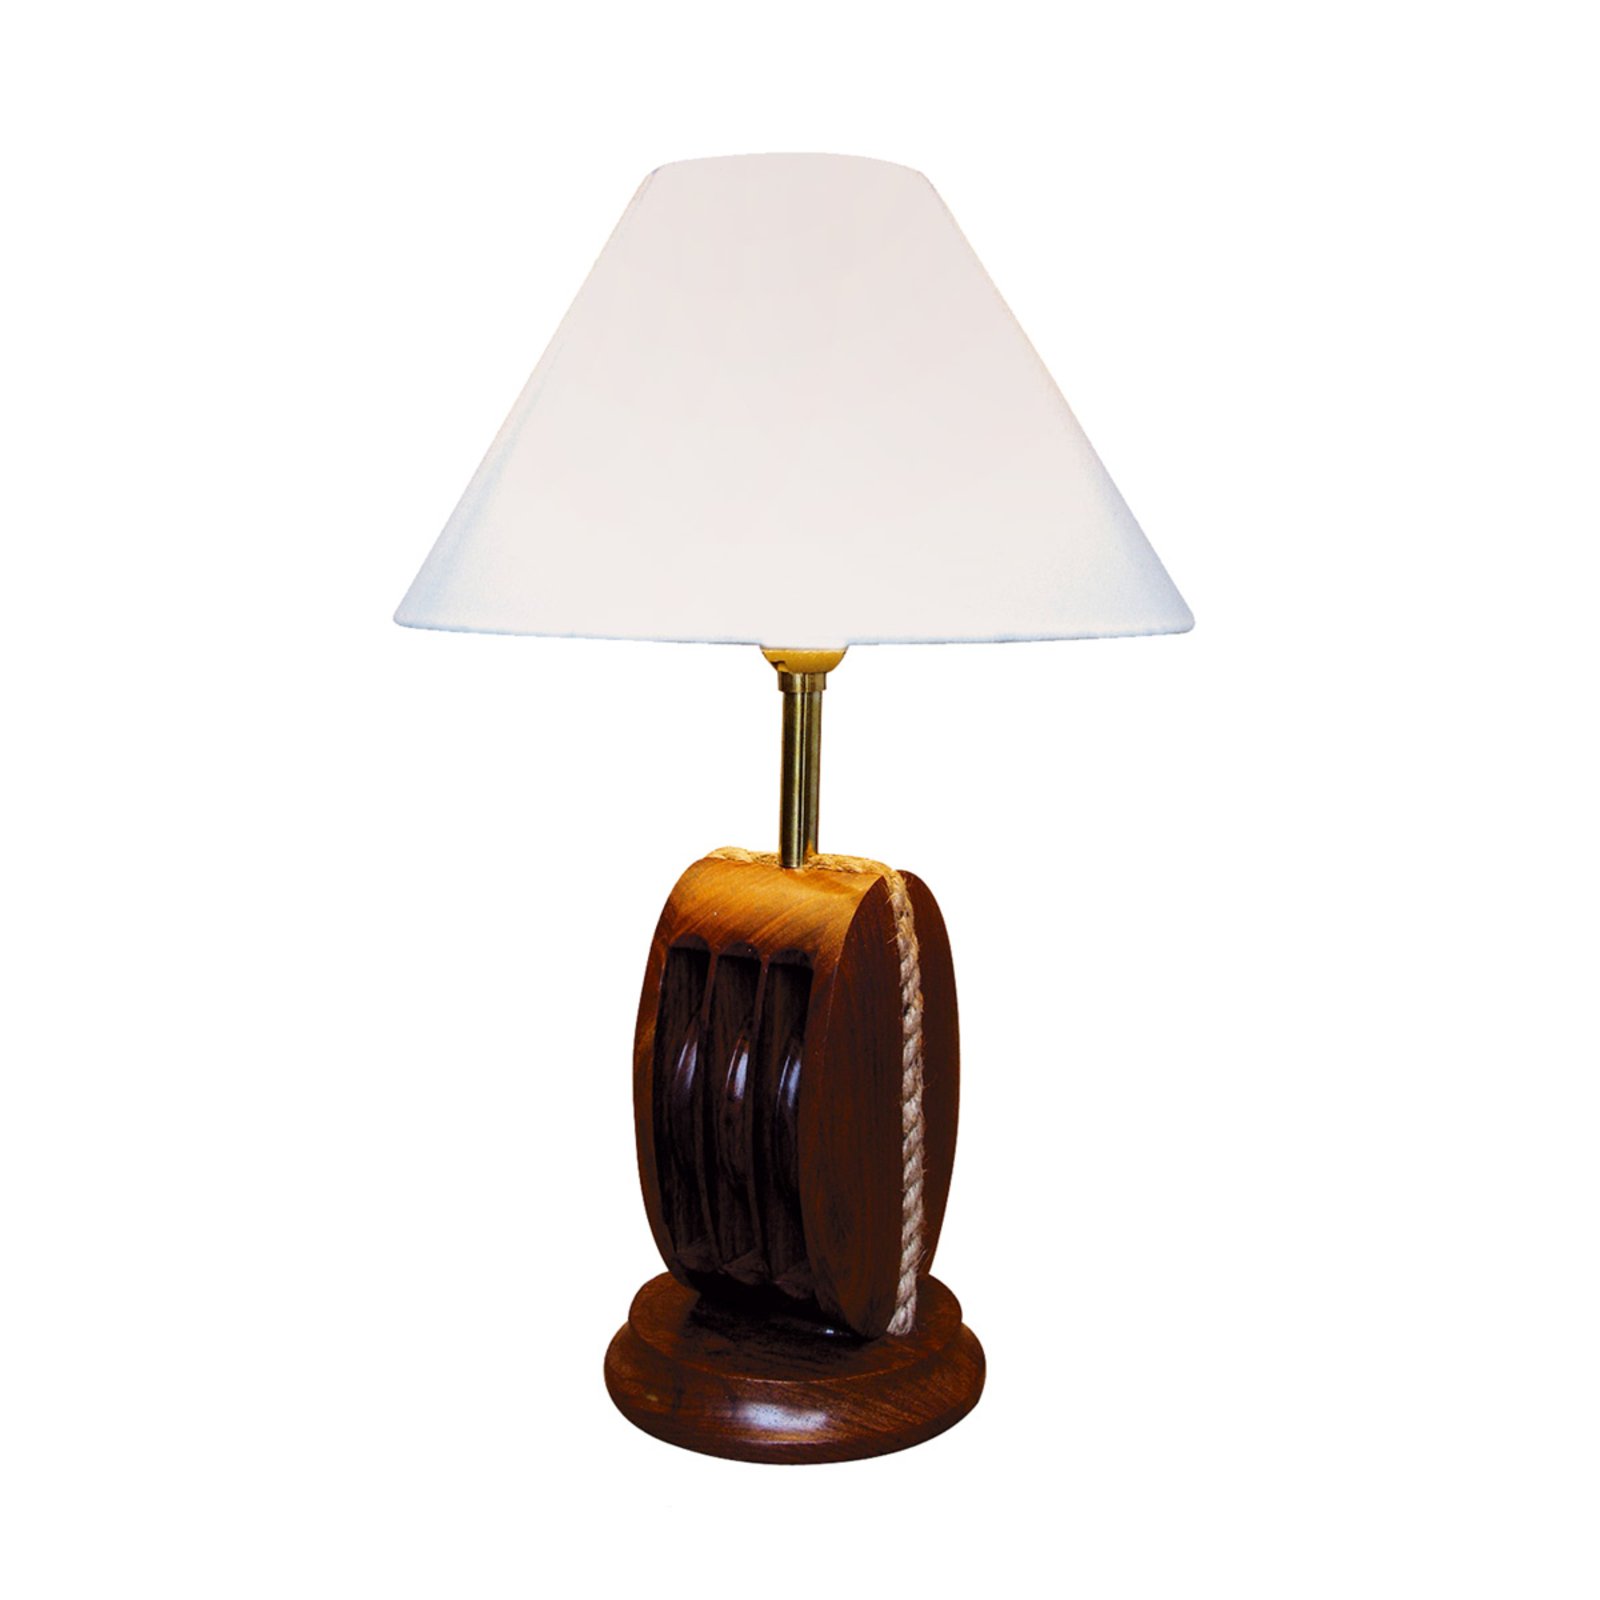 Ahoi table lamp with wood, height 39 cm